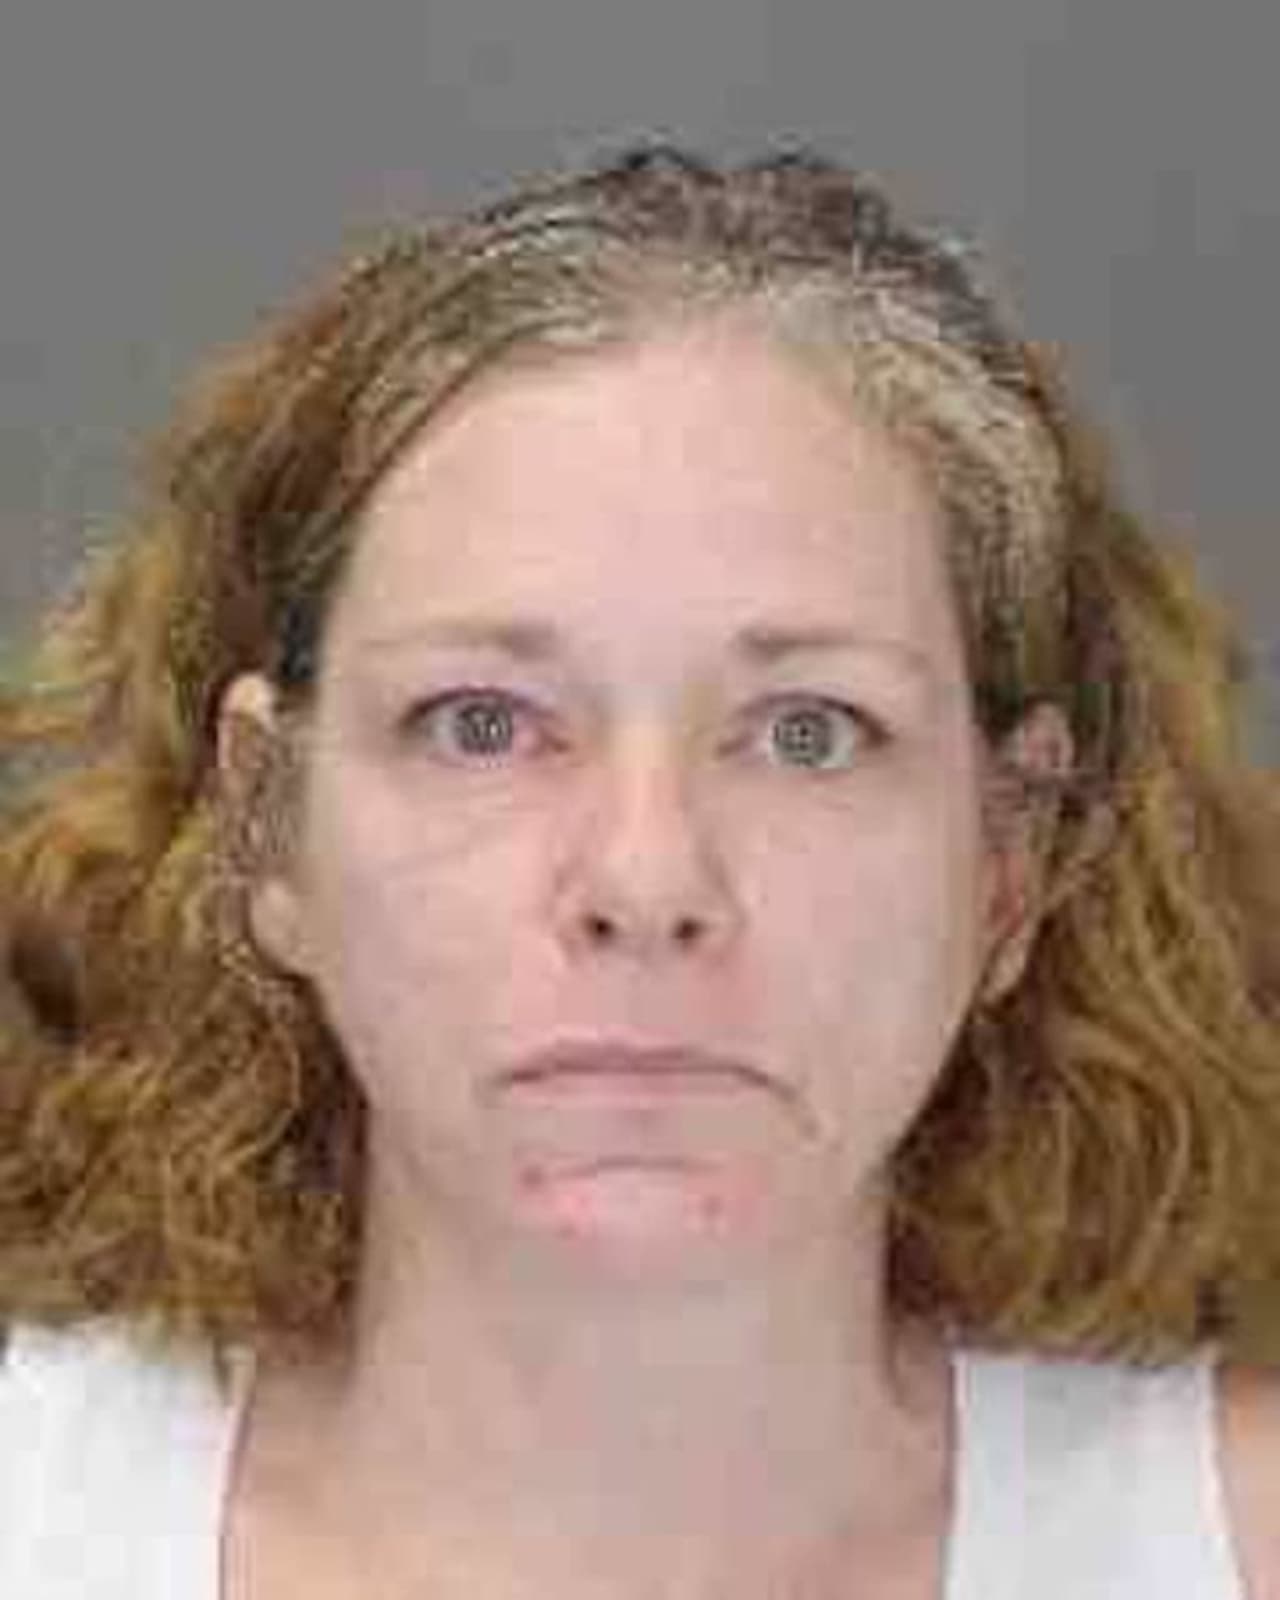 Heather Angelino is wanted by the Ramapo police for failing to show up in court on charges of possession of a hypodermic instrument.